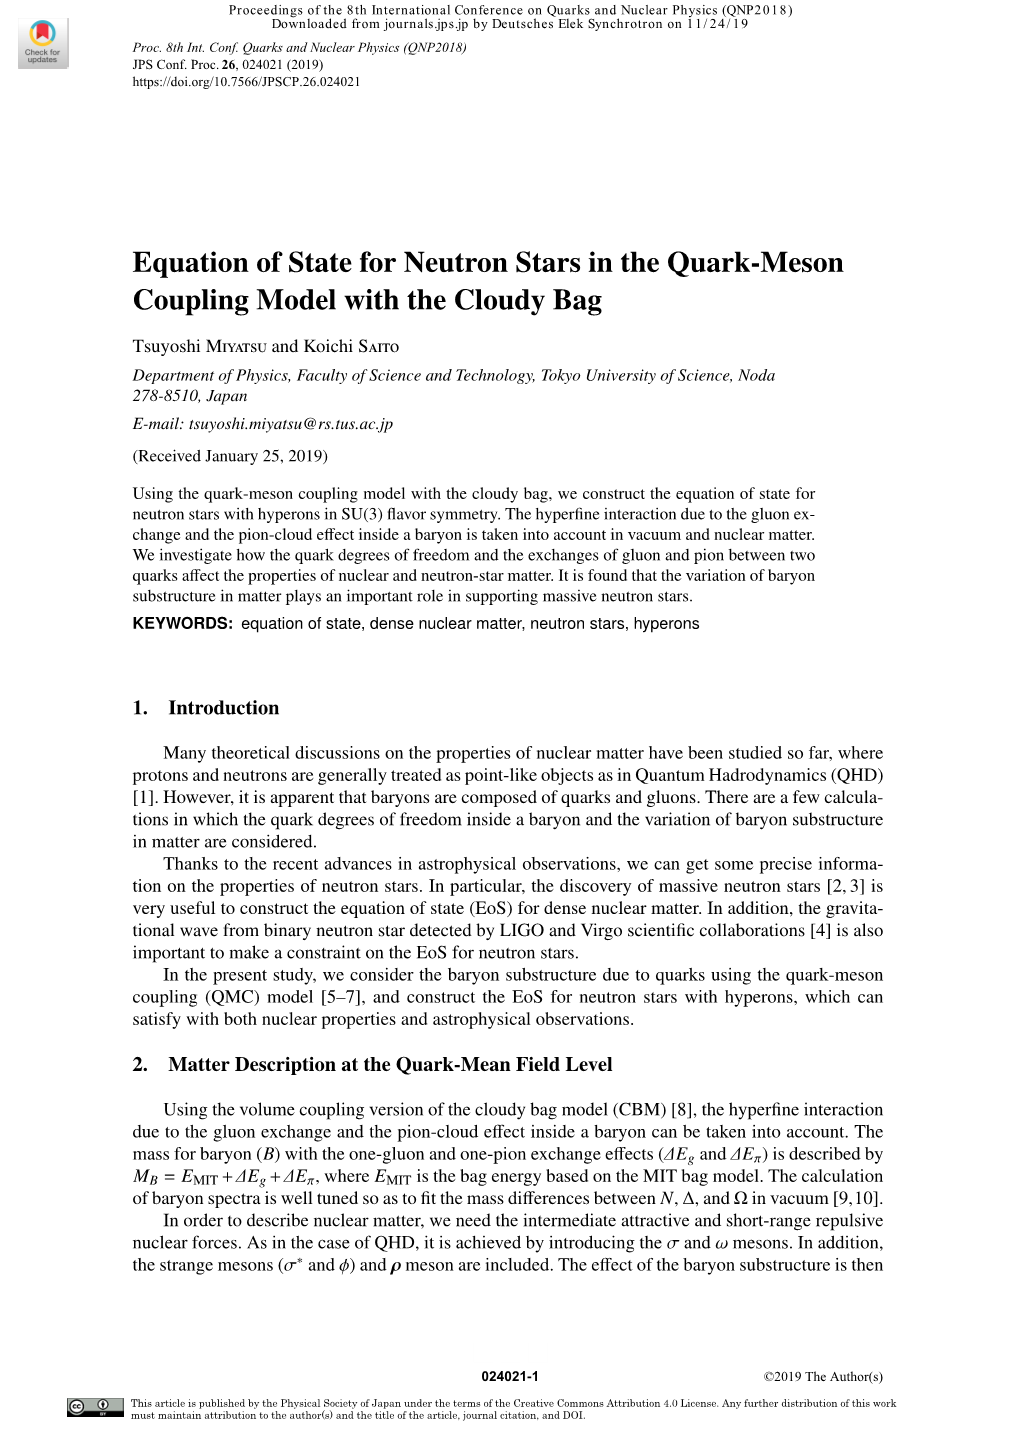 Equation of State for Neutron Stars in the Quark-Meson Coupling Model with the Cloudy Bag